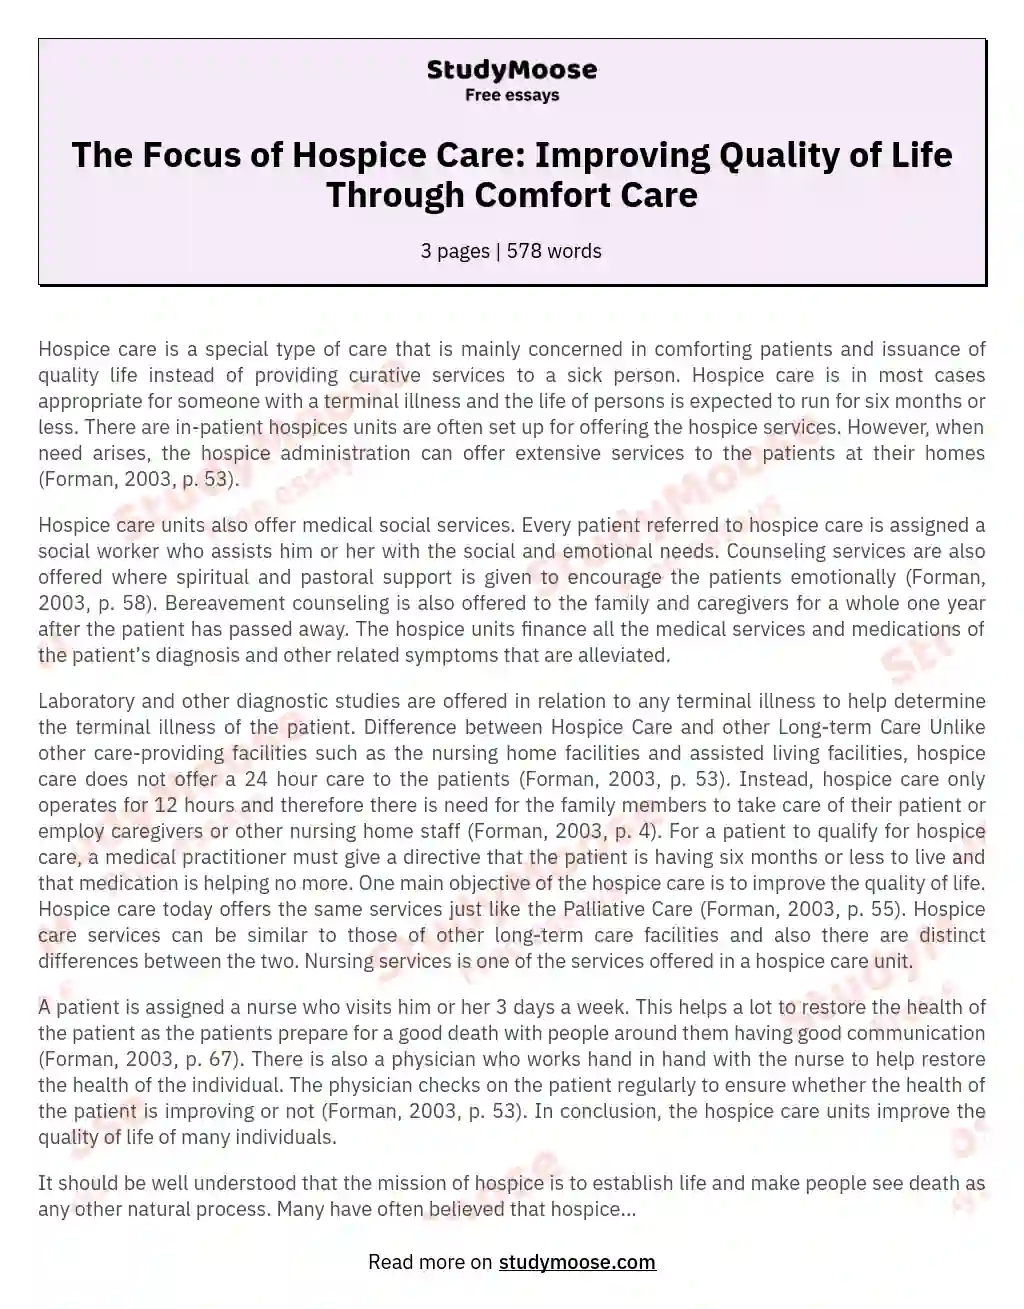 The Focus of Hospice Care: Improving Quality of Life Through Comfort Care essay